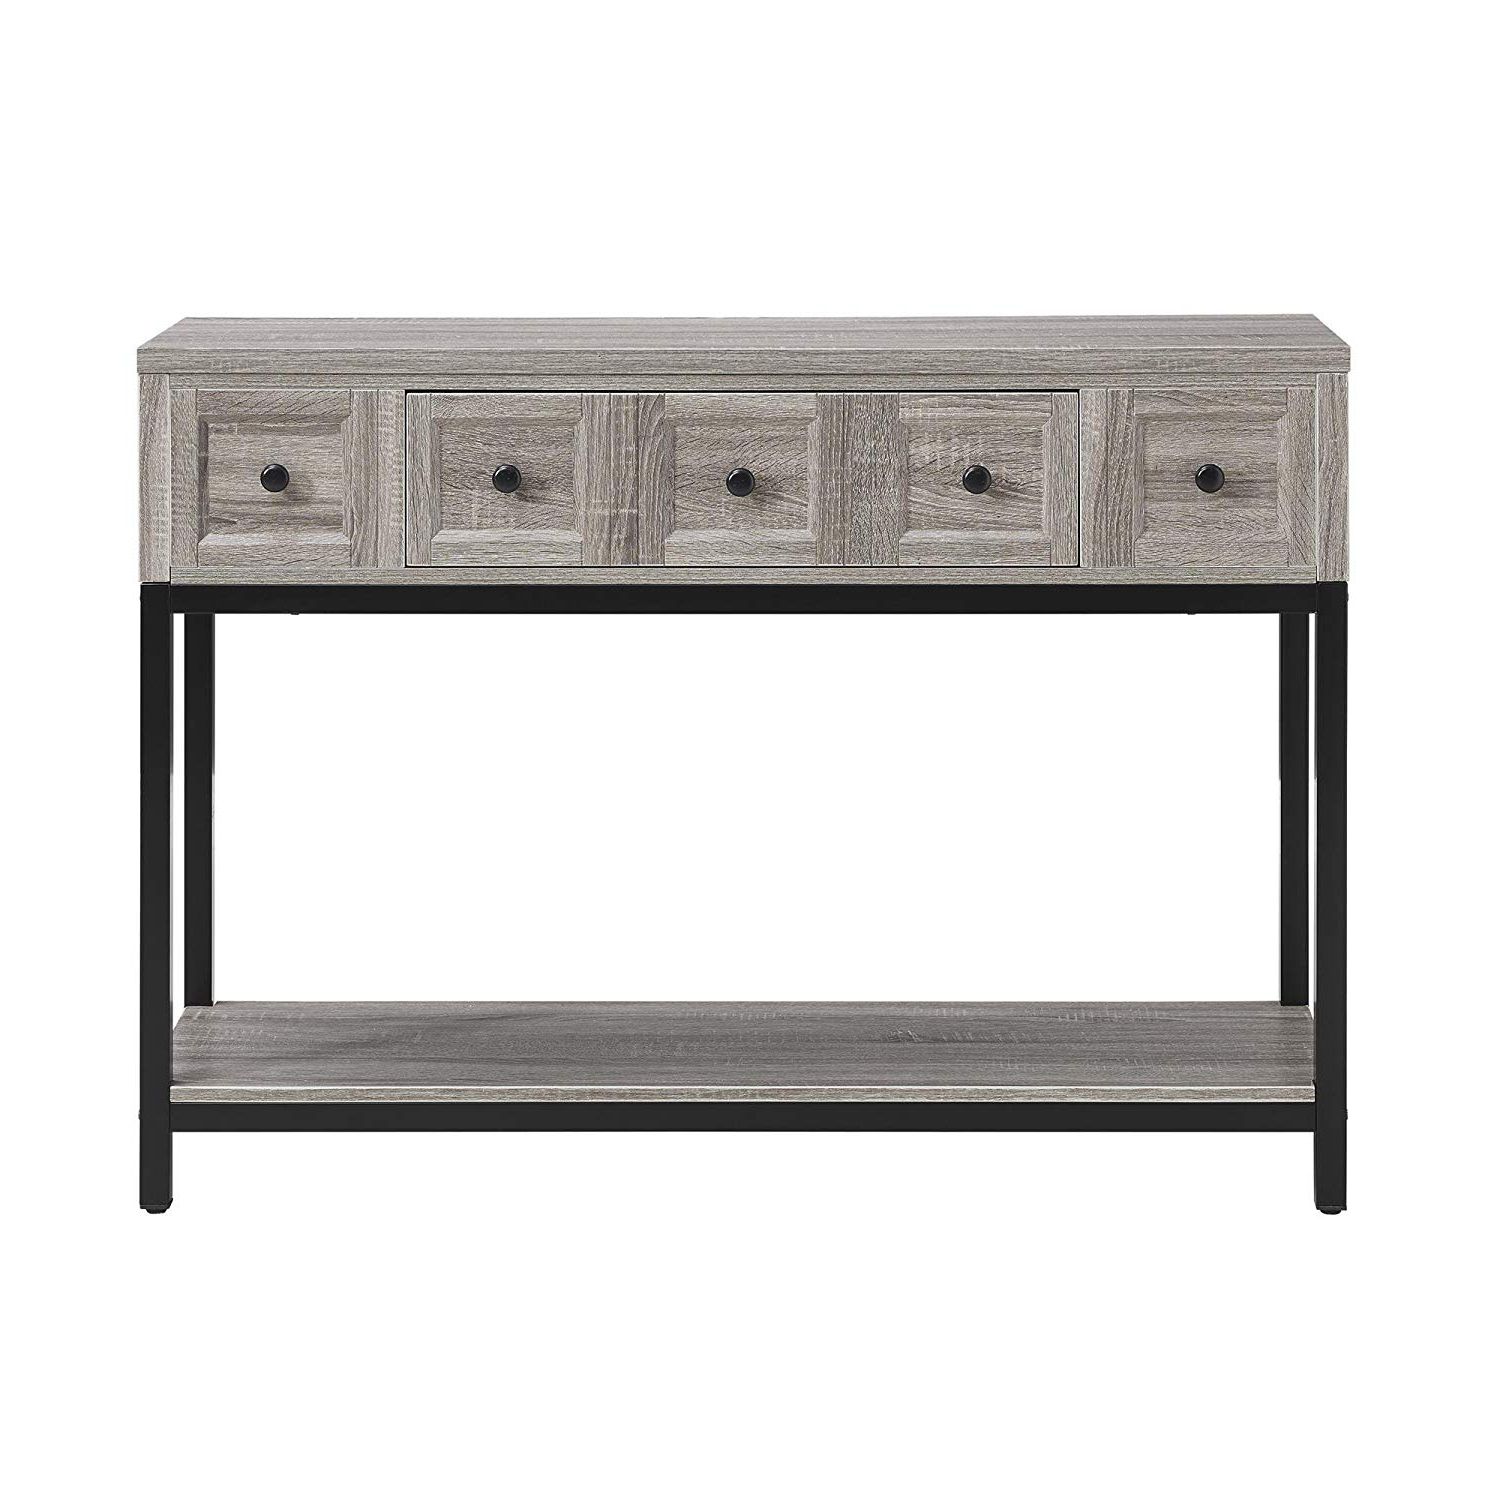 Well Liked Parsons Black Marble Top & Dark Steel Base 48x16 Console Tables Inside Amazon: Altra Furniture Console Table In Sonoma Oak Finish (Photo 11 of 20)